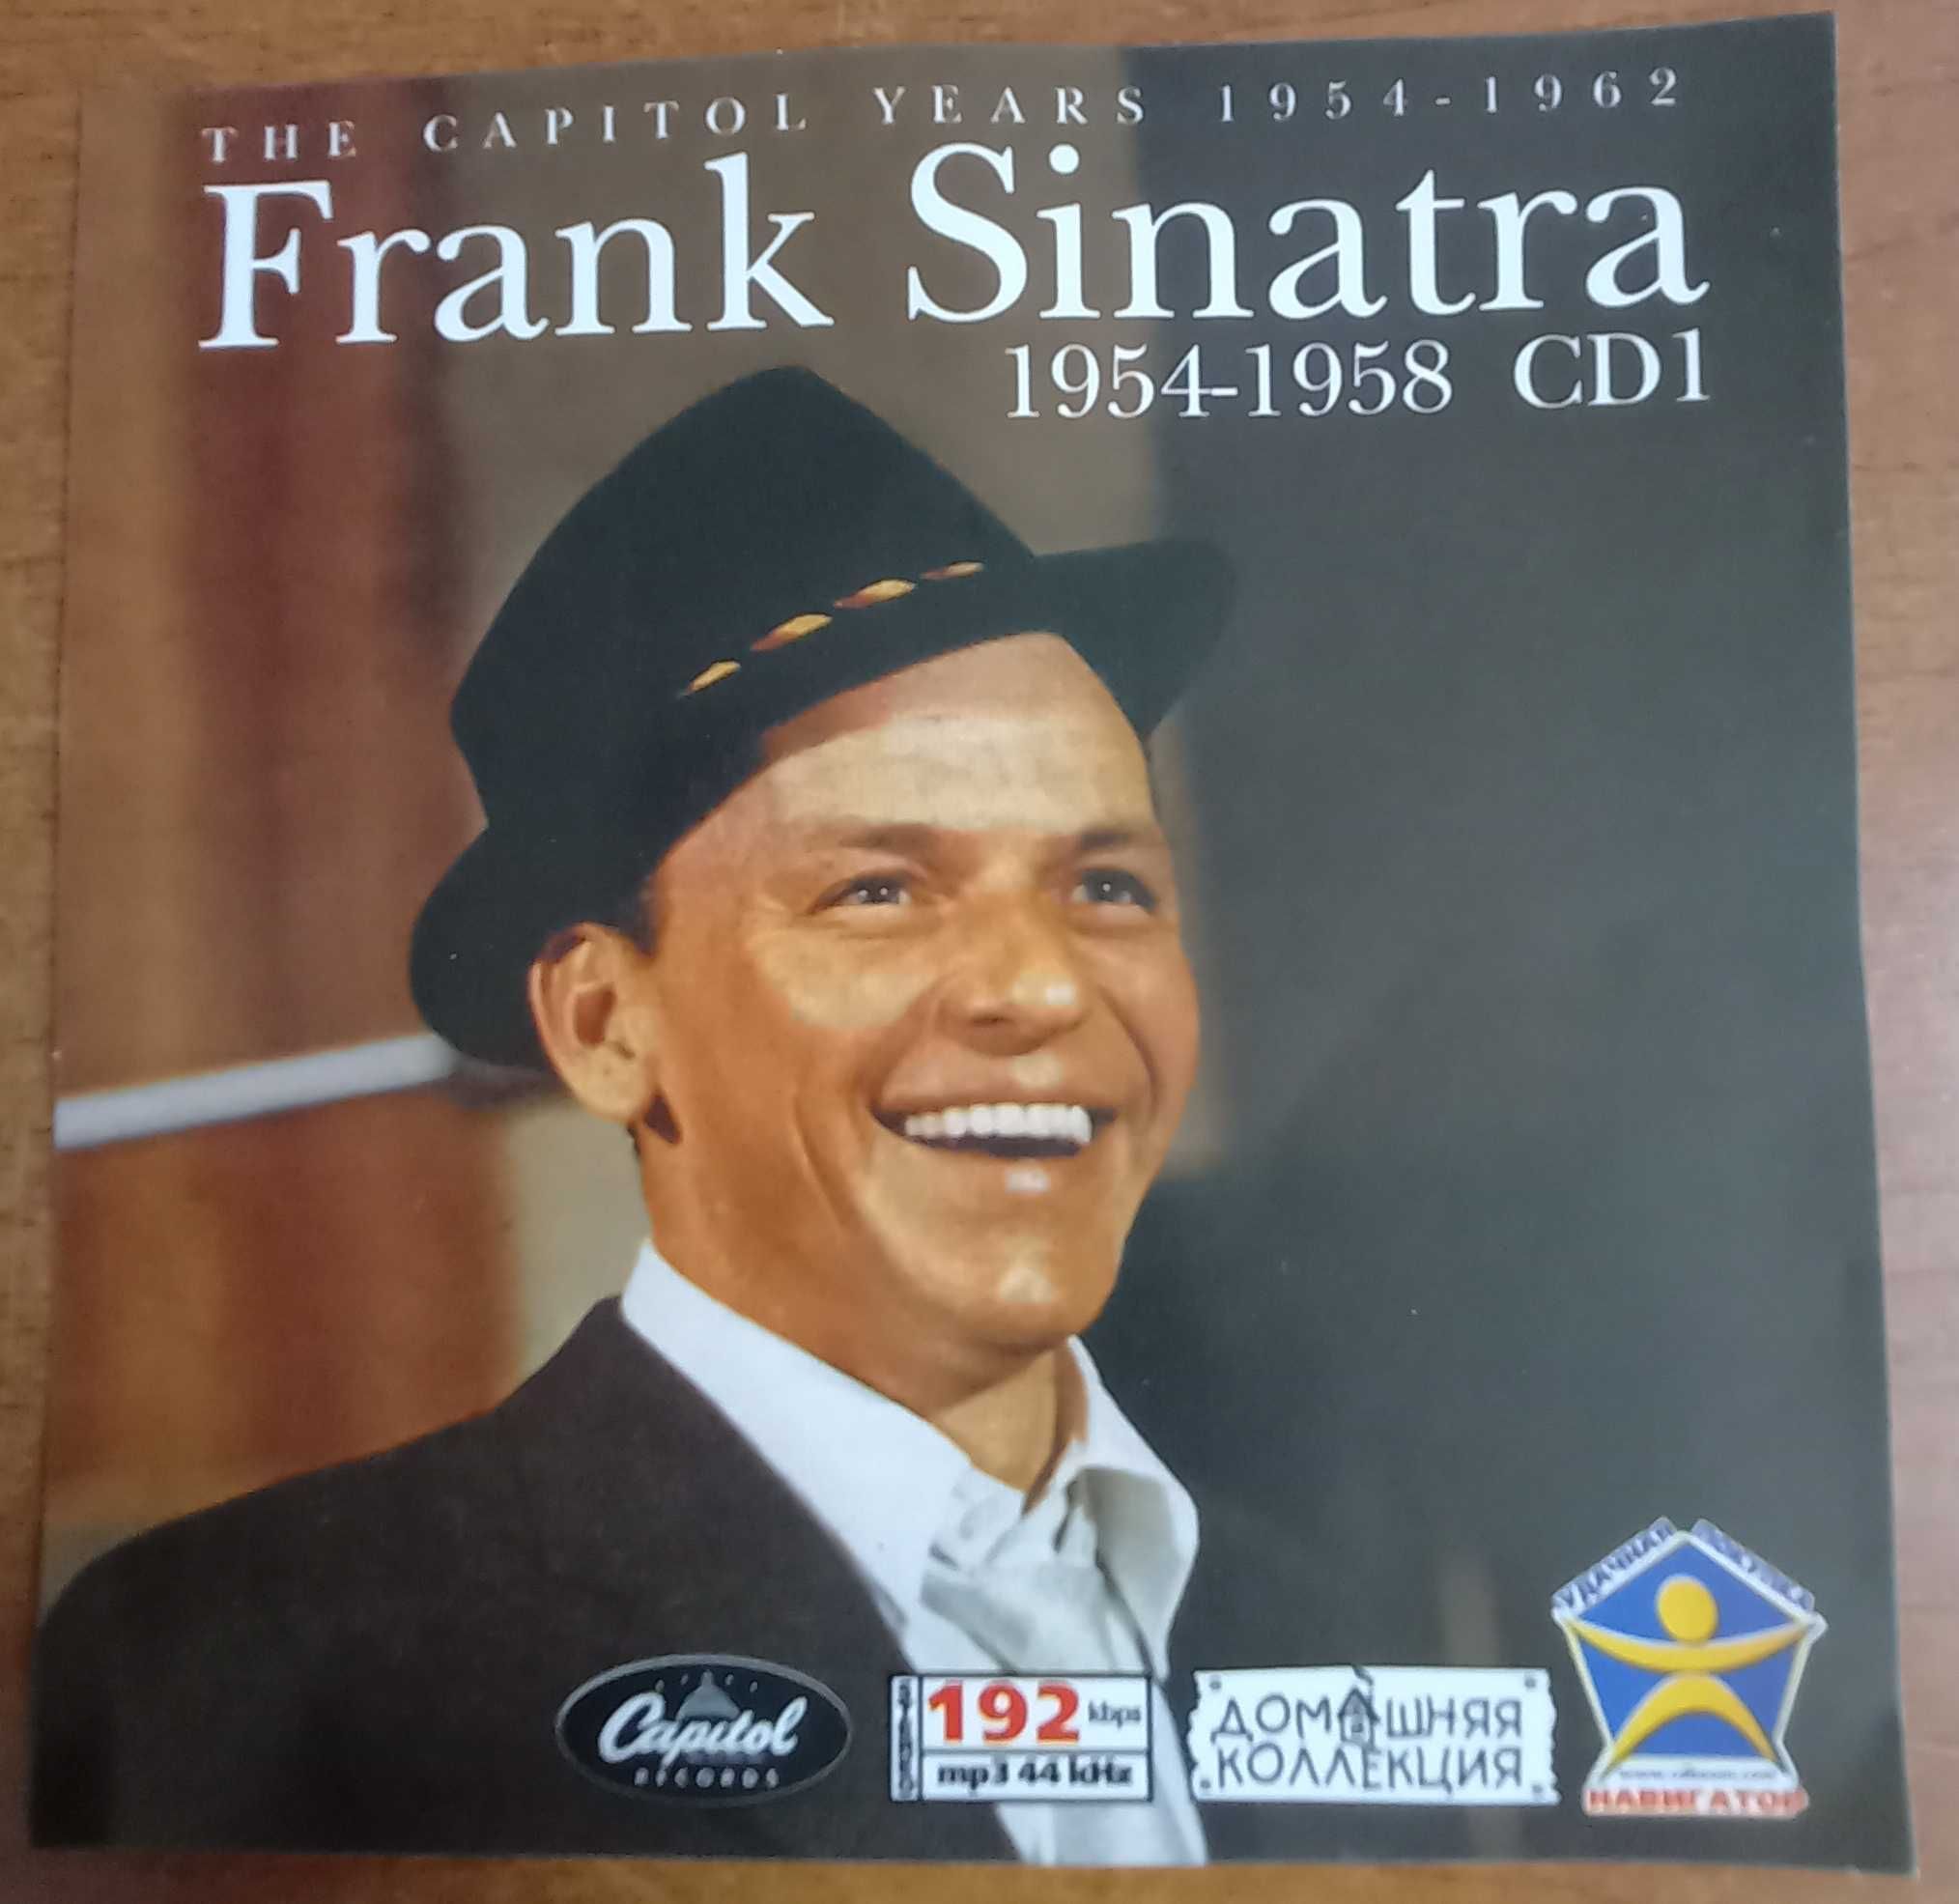 CD Frank Sinatra "The Capitol Years 1954-1962"